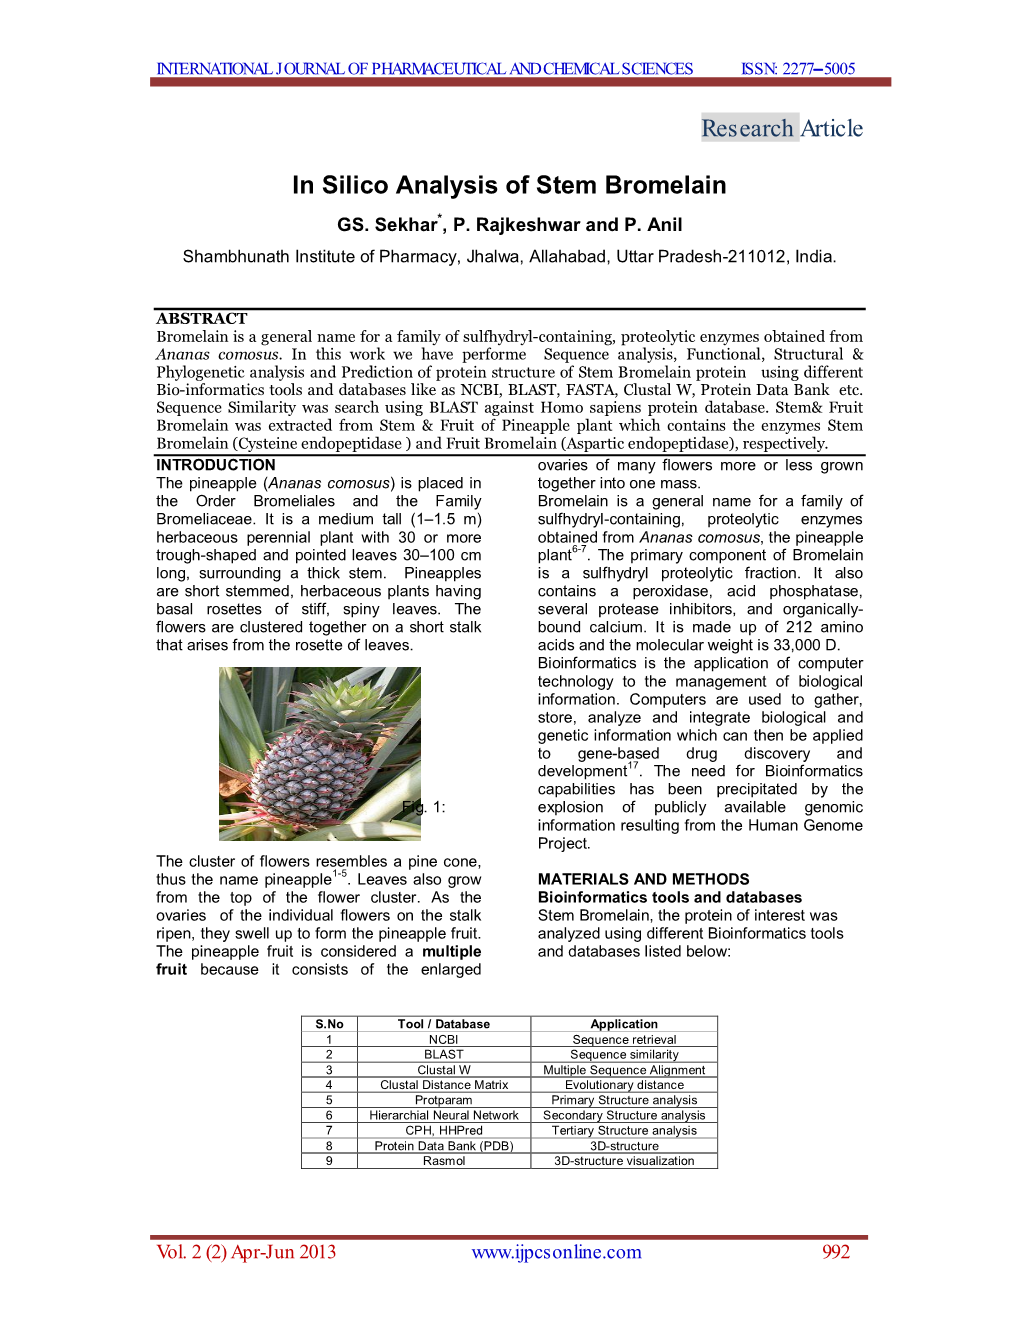 Research Article in Silico Analysis of Stem Bromelain